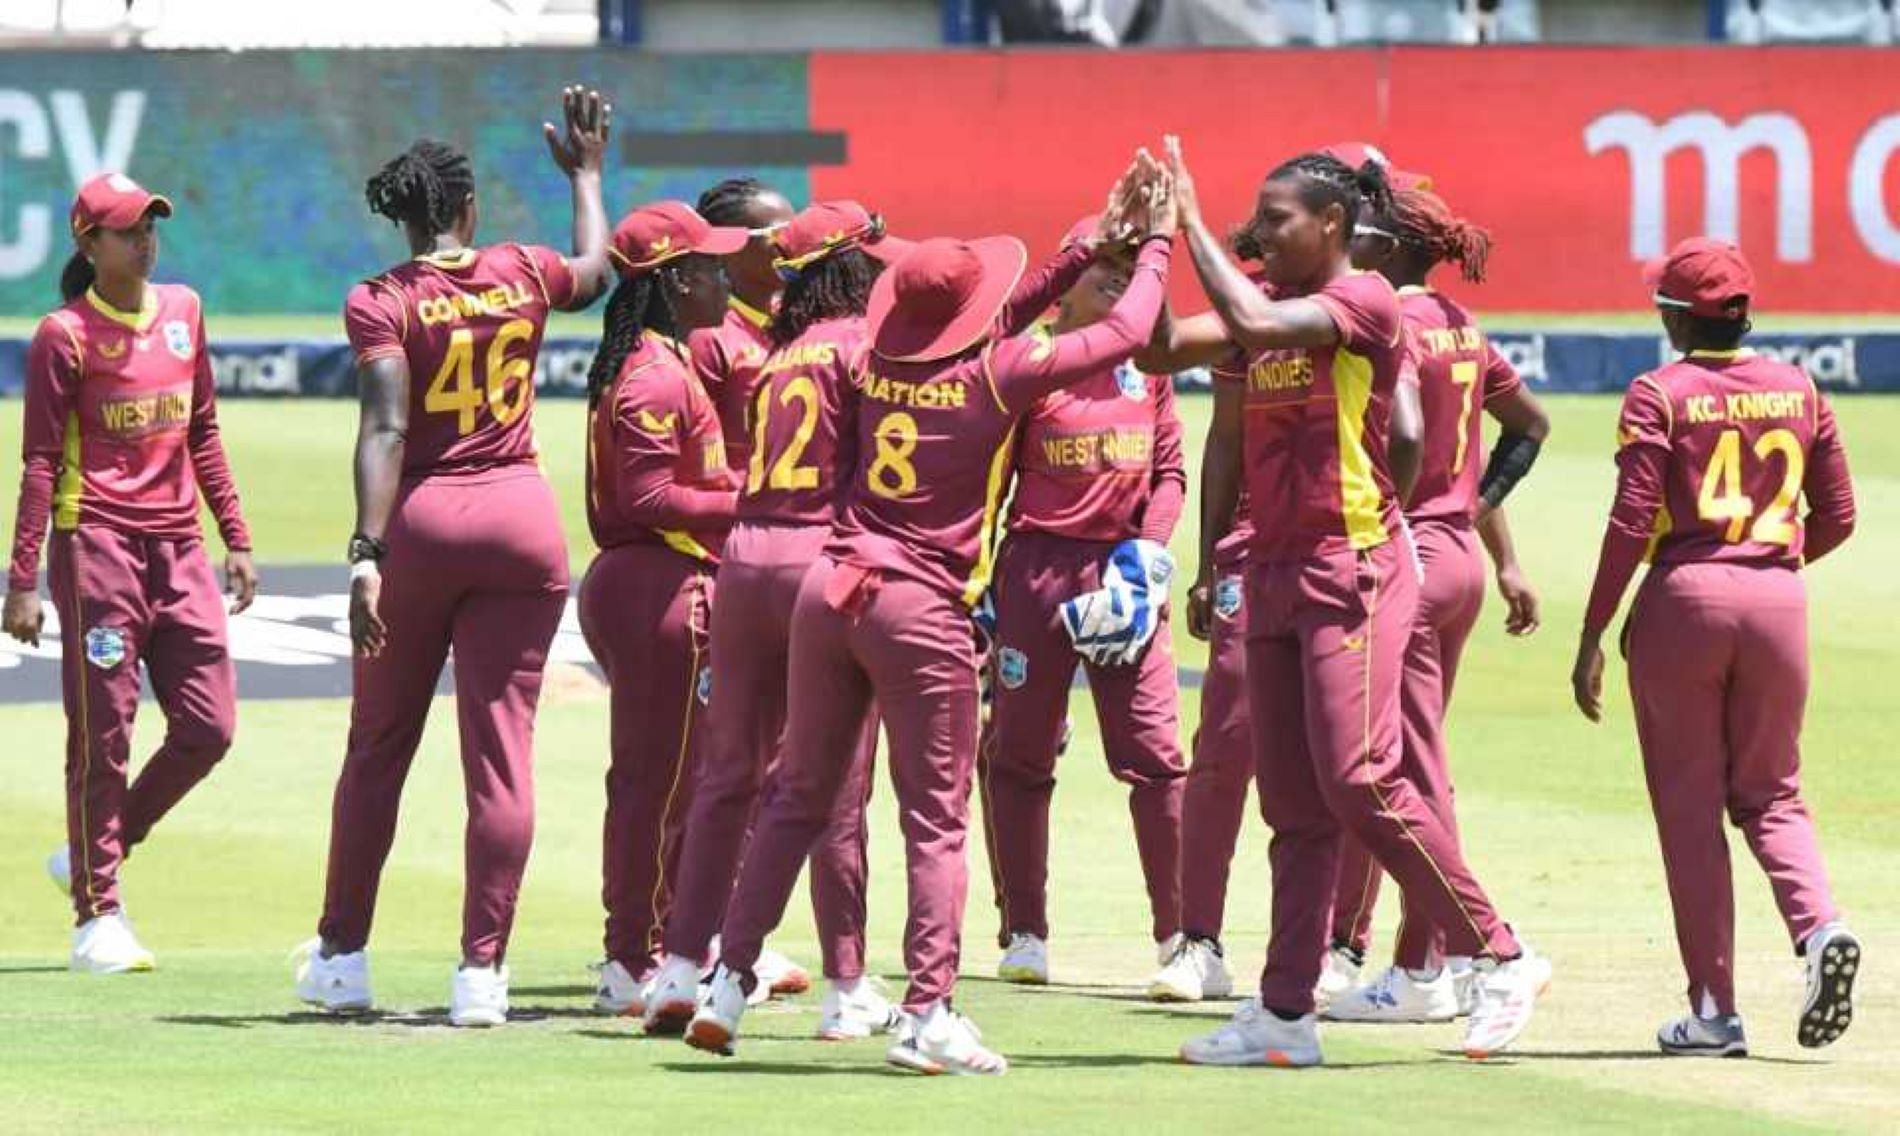 West Indies Women hold the record for the most runs scored in a Super Over against the Proteas.